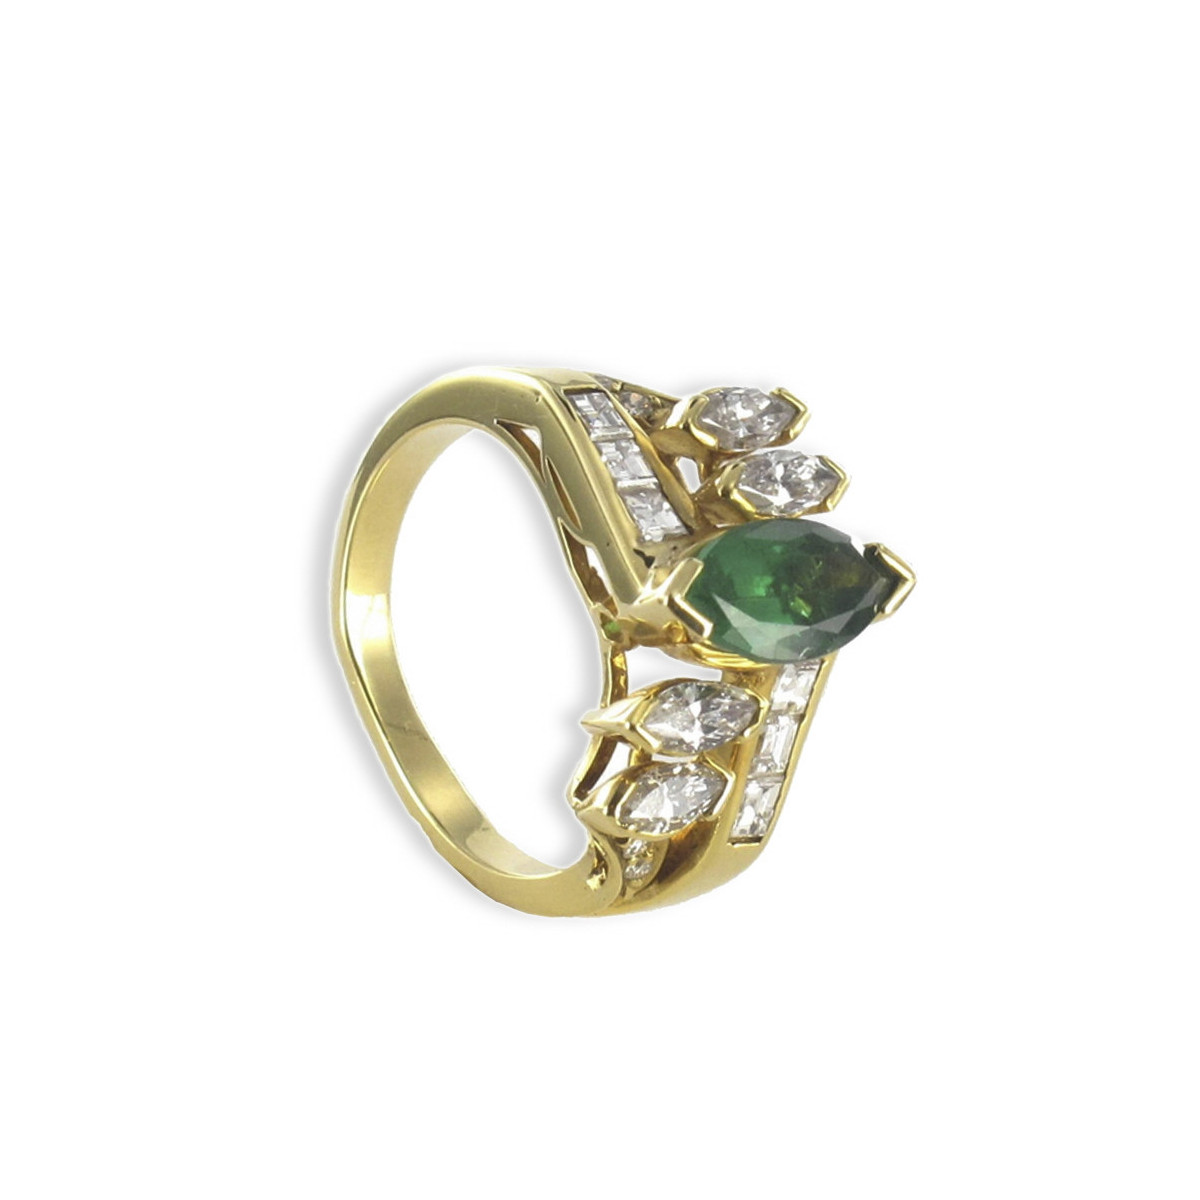 GOLD DIAMONDS AND EMERALD RING